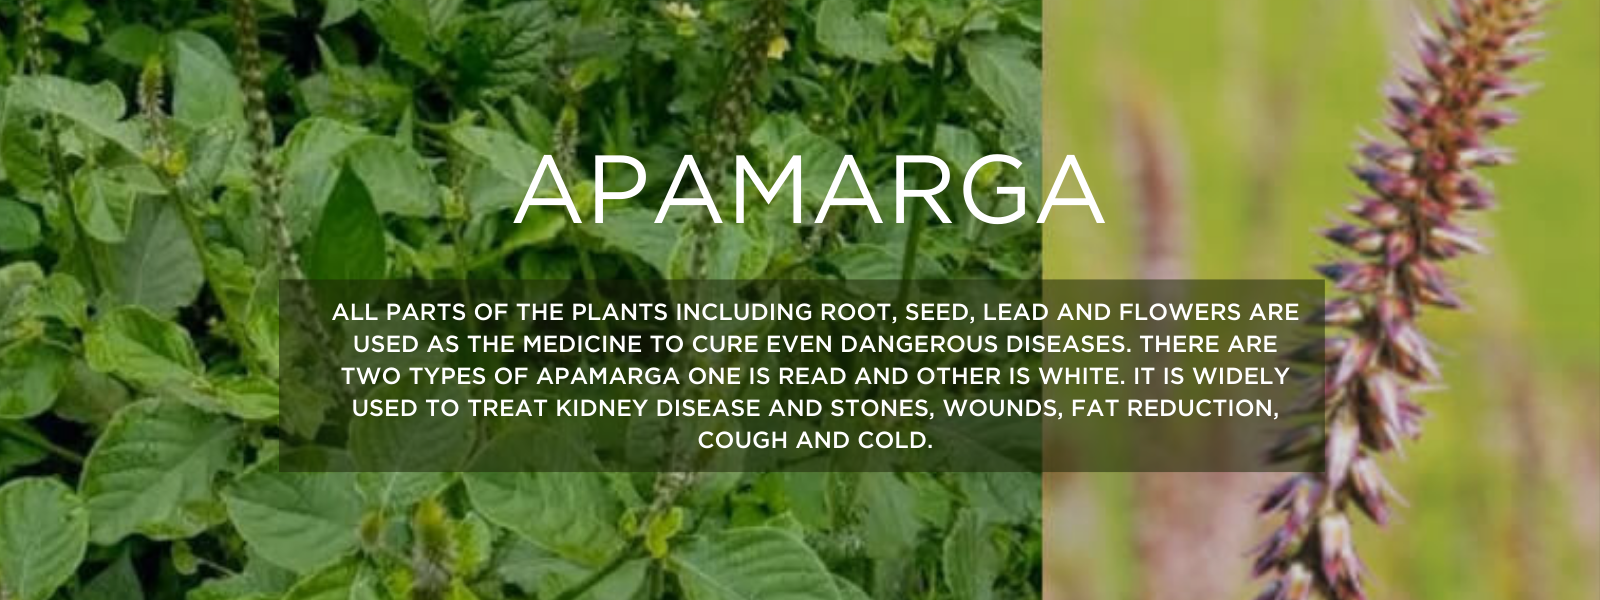 Apamarga- Health Benefits, Uses and Important Facts